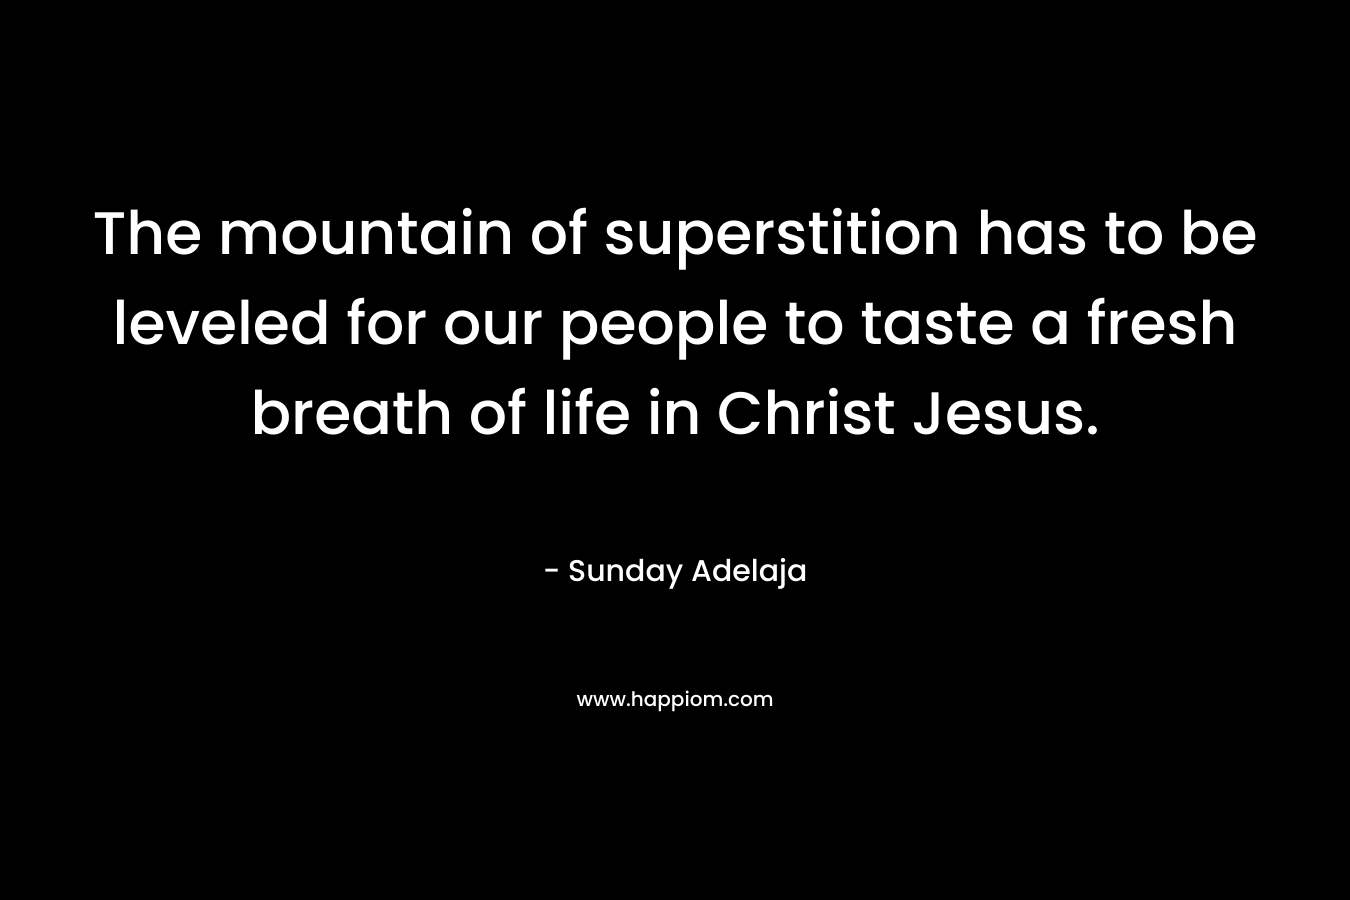 The mountain of superstition has to be leveled for our people to taste a fresh breath of life in Christ Jesus. – Sunday Adelaja